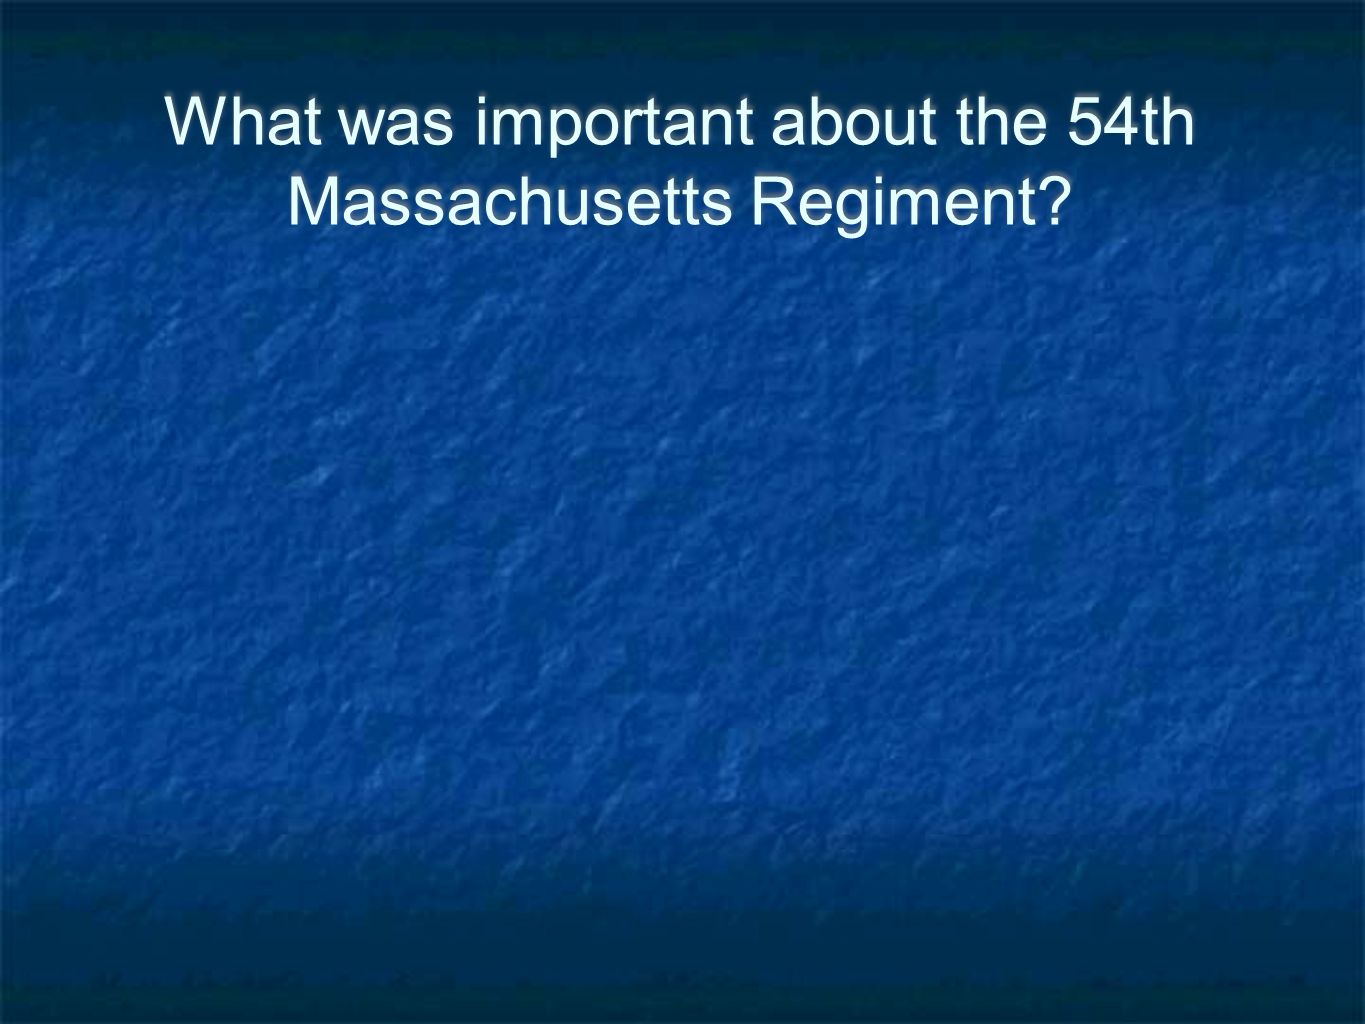 What was important about the 54th Massachusetts Regiment